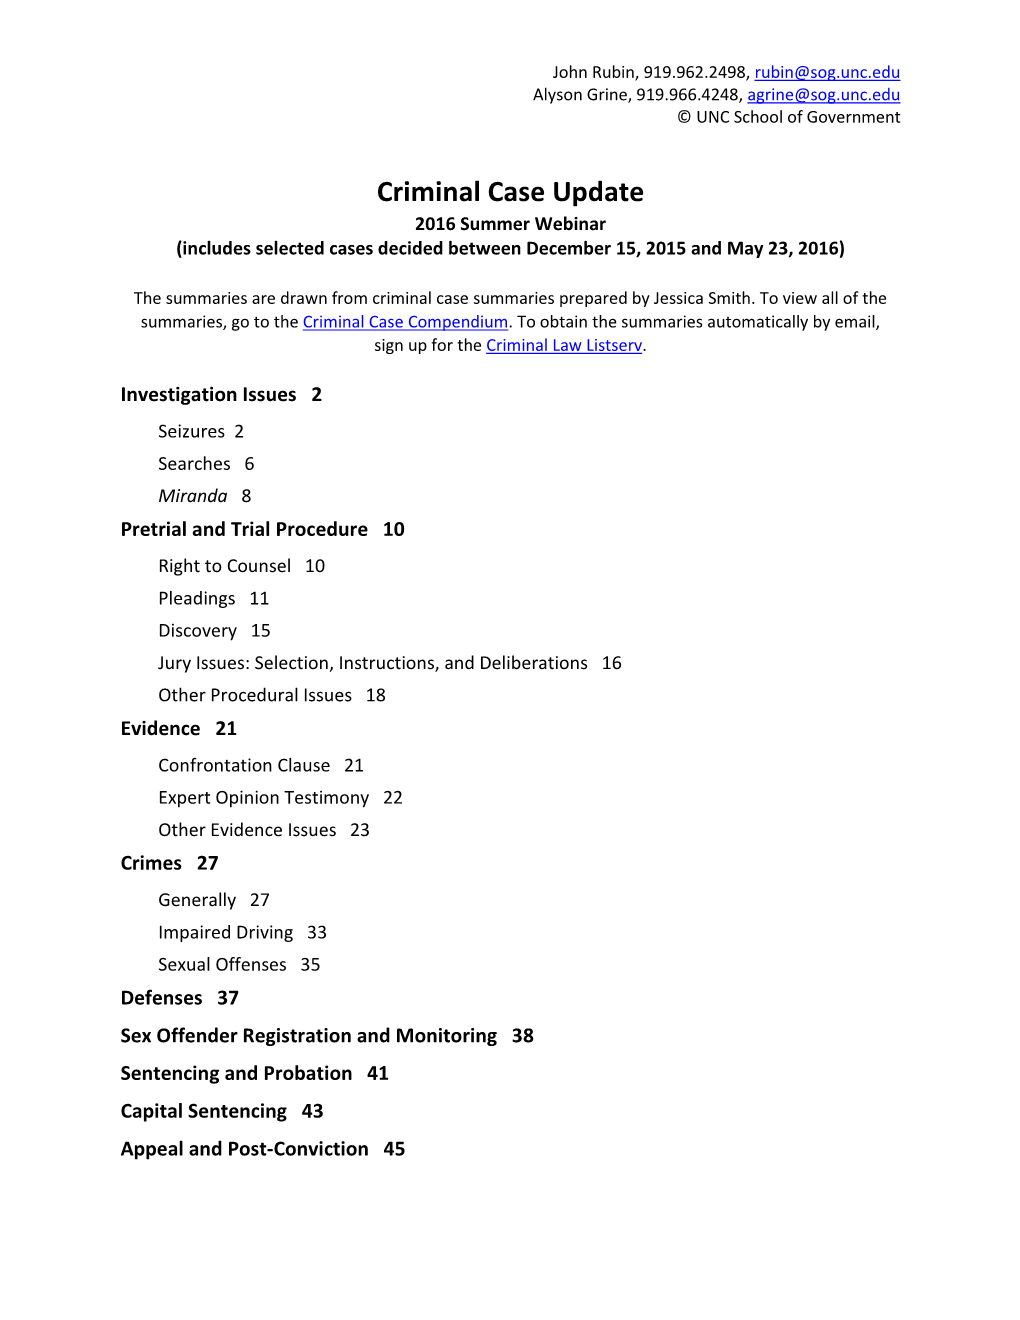 Criminal Case Update 2016 Summer Webinar (Includes Selected Cases Decided Between December 15, 2015 and May 23, 2016)